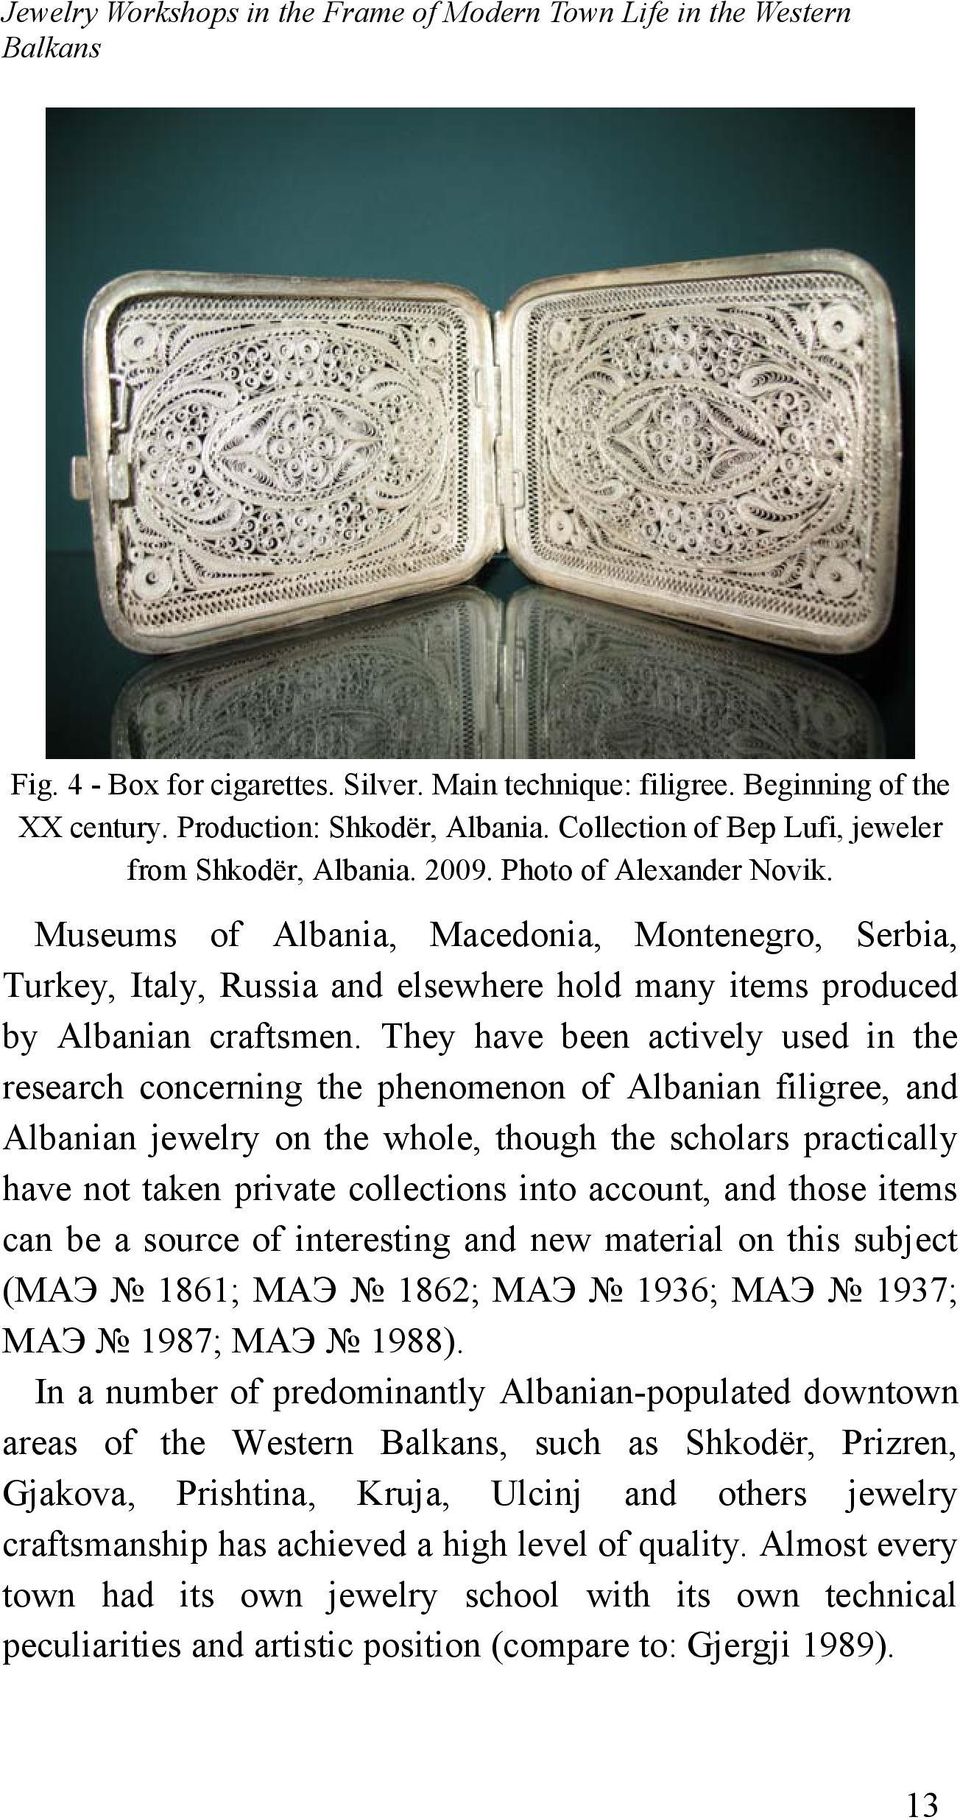 Museums of Albania, Macedonia, Montenegro, Serbia, Turkey, Italy, Russia and elsewhere hold many items produced by Albanian craftsmen.